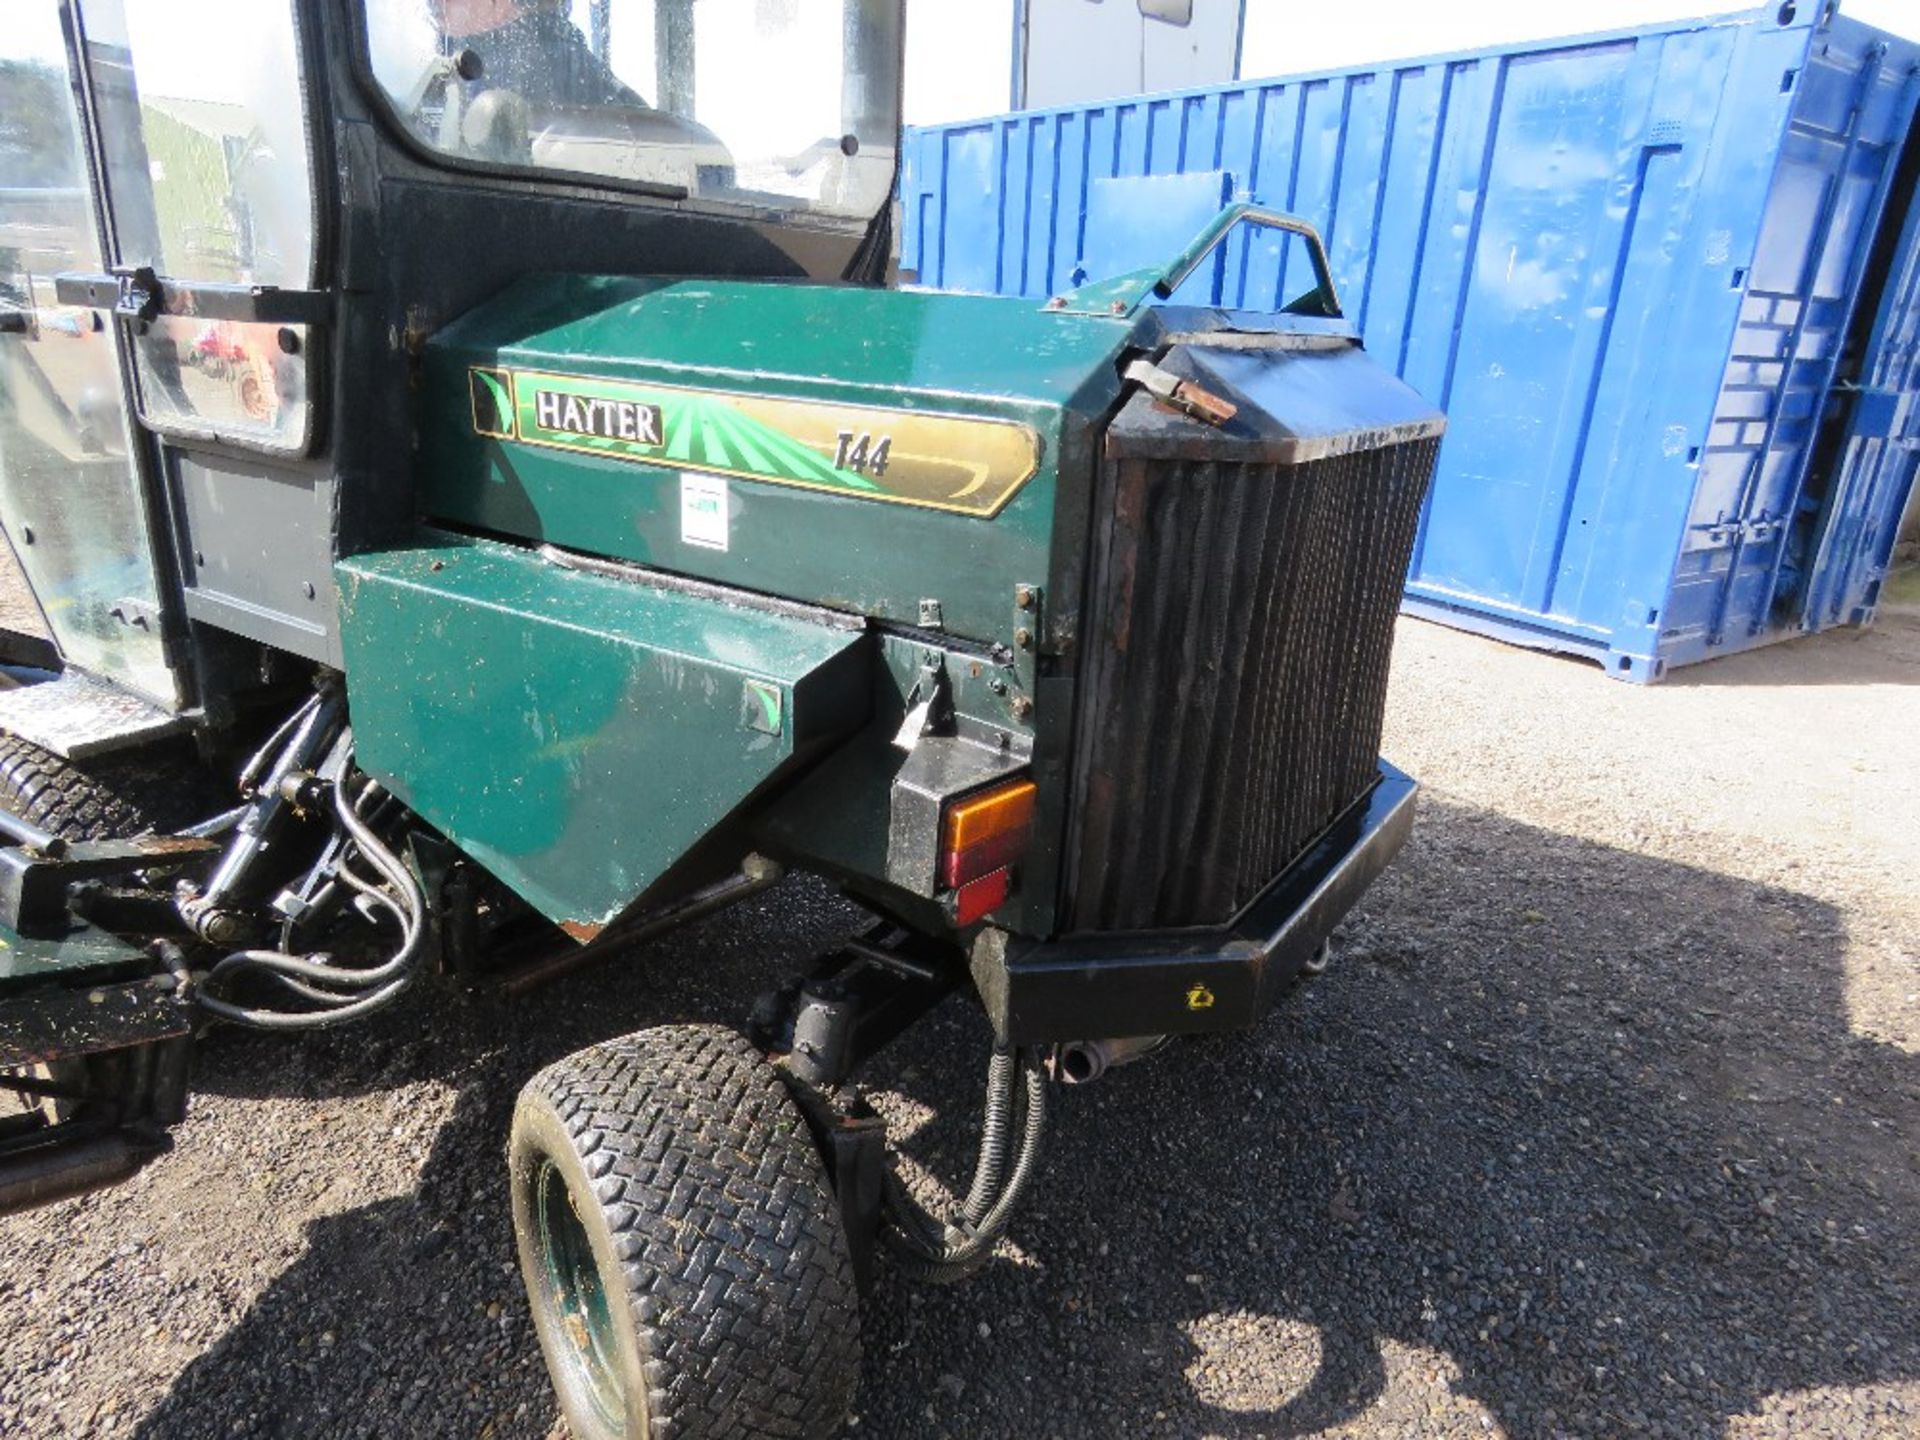 HAYTER 5 GANG T44 CABBED RIDE ON CYLINDER MOWER WITH KUBOTA ENGINE. WHEN TESTED WAS SEEN TO DRIVE, M - Image 5 of 13